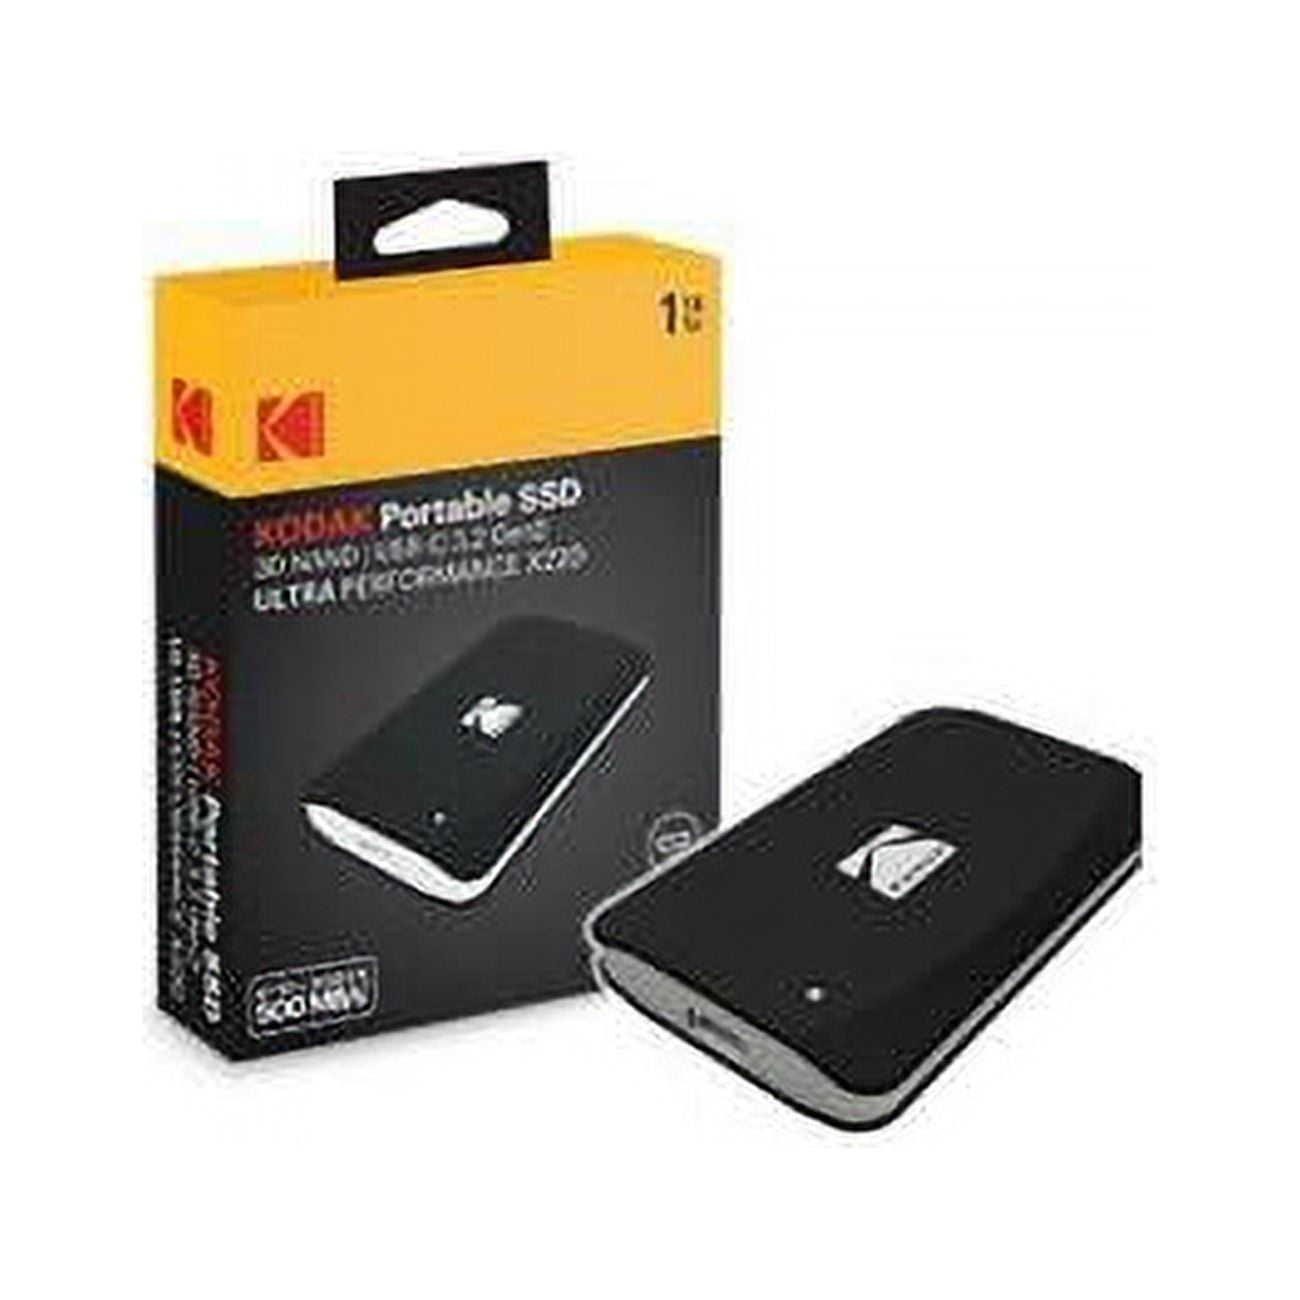 Picture of Kodak EKSSD1TX220K Portable X220 1TB Solid State Drive